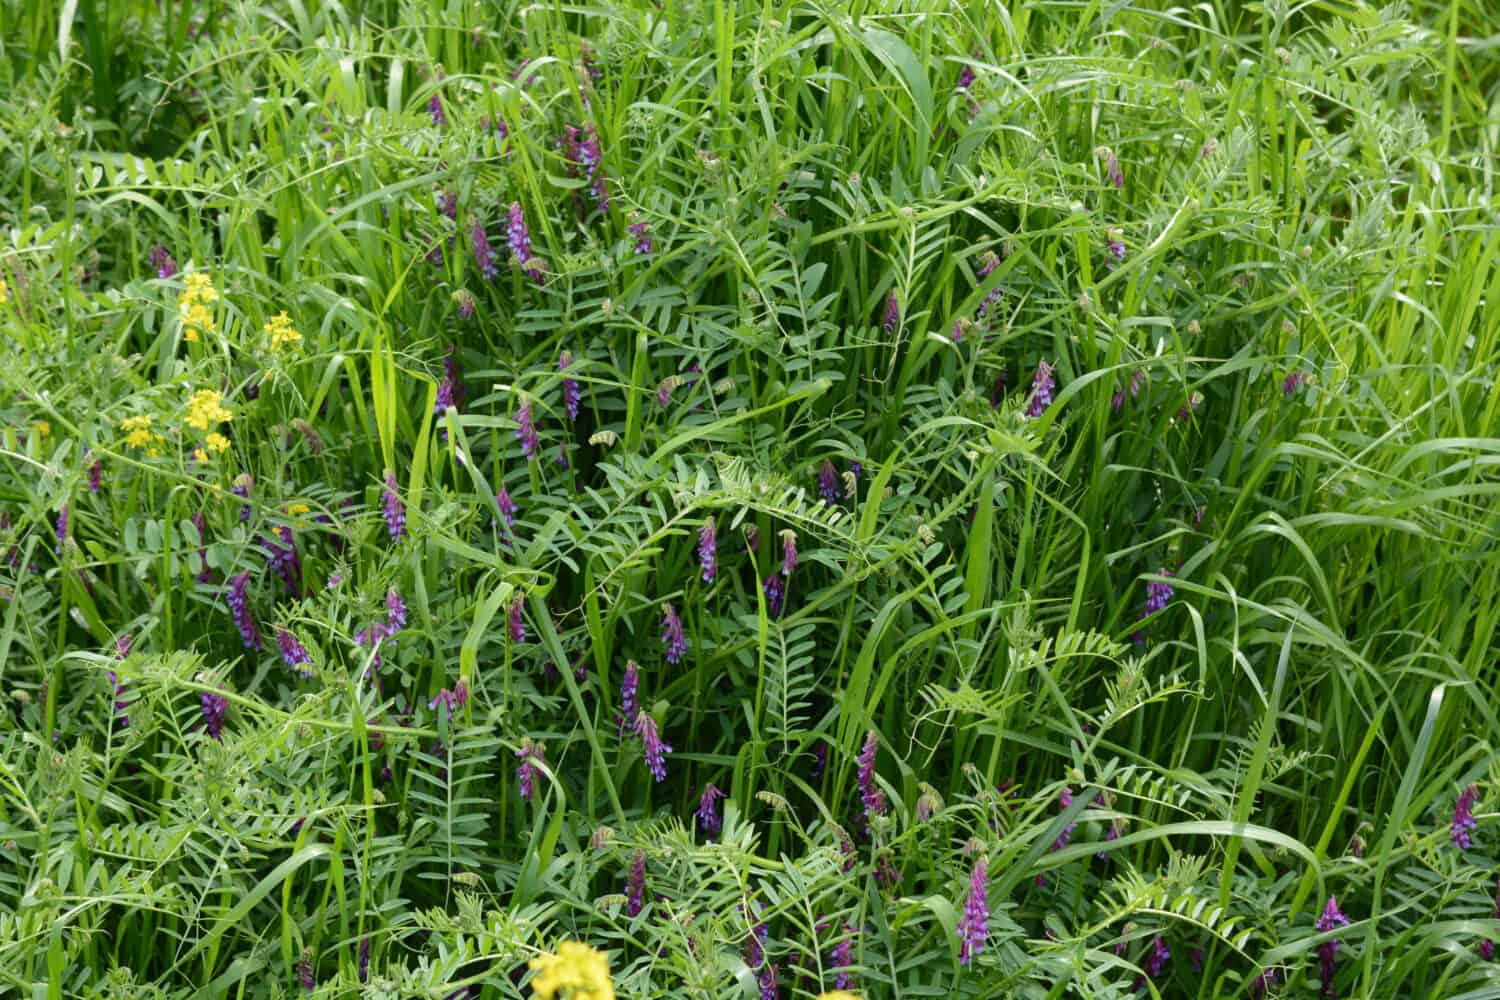 Hairy vetch (Vicia villosa)is a good cover crop for watermelon gardens.